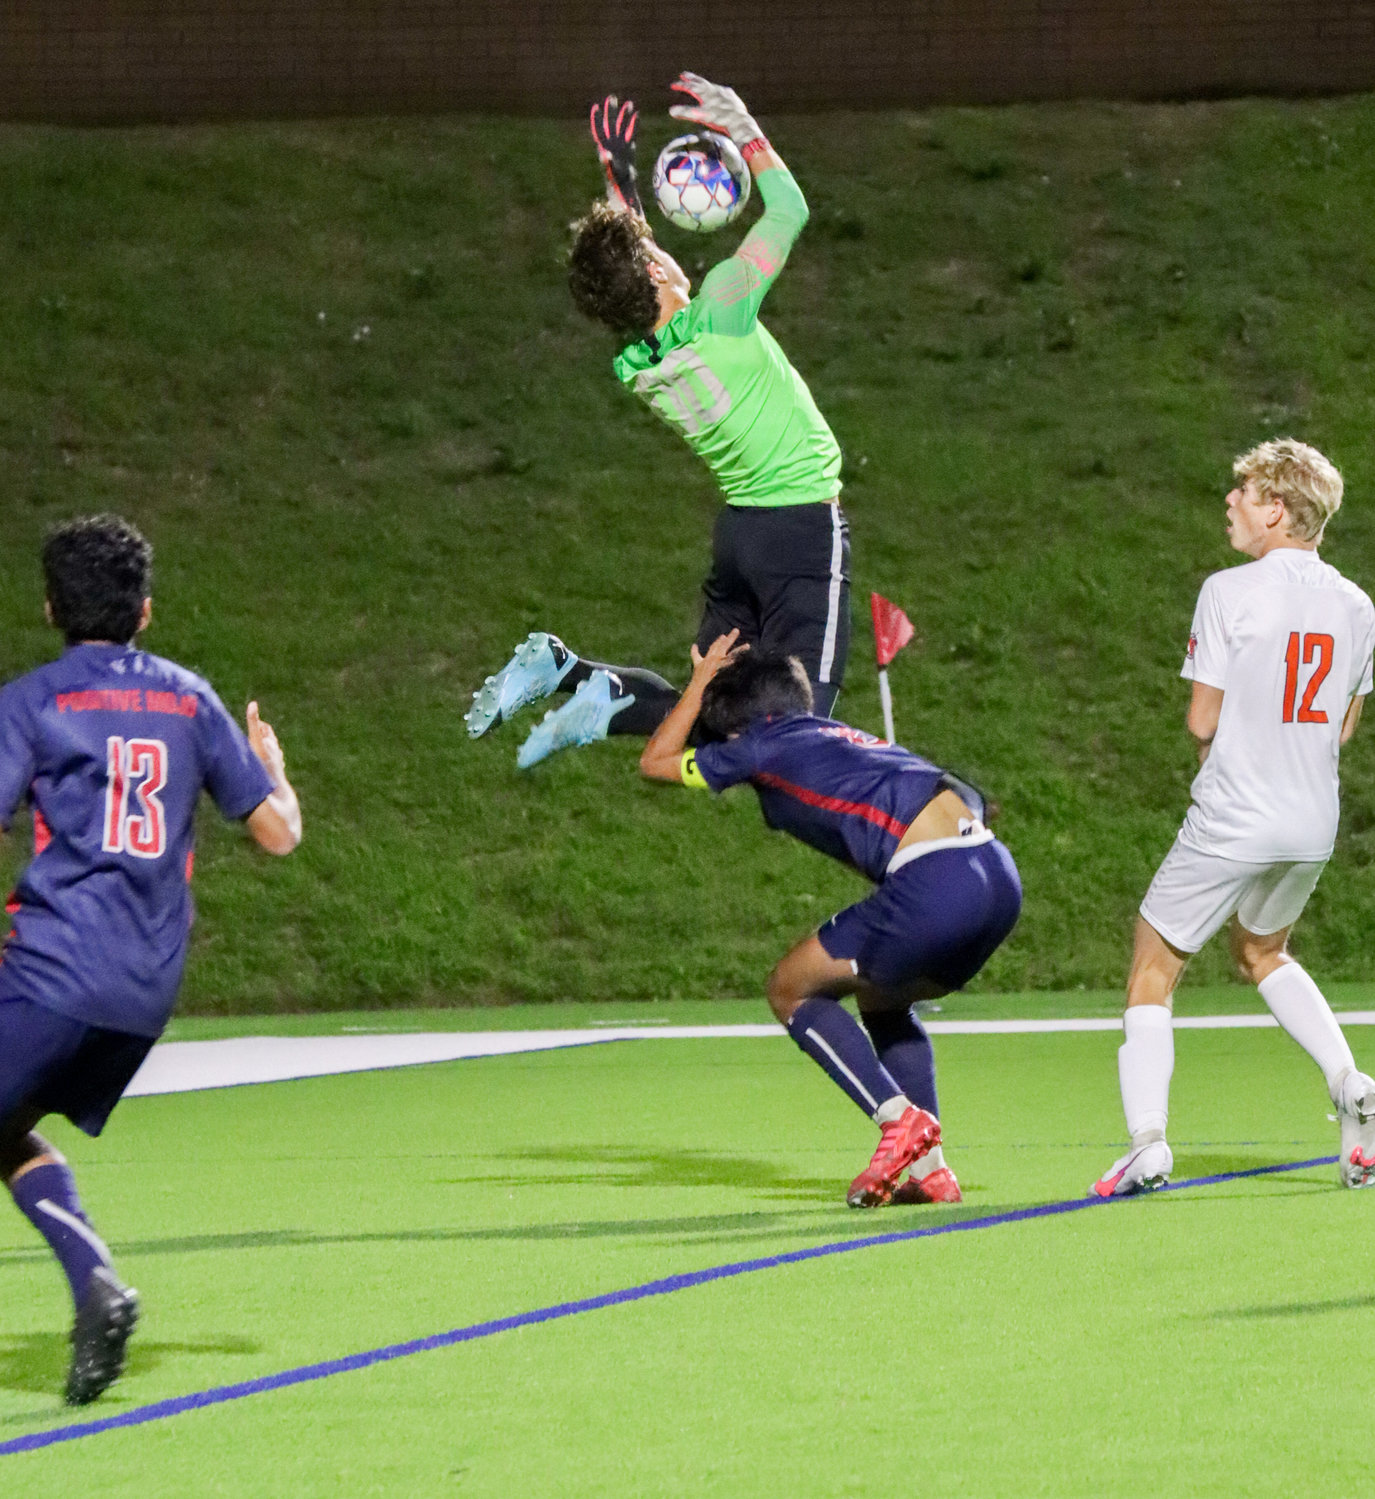 Tompkins senior goalkeeper Paulo Valente goes up for a save during the Falcons’ Class 6A regional quarterfinal win over Seven Lakes on Friday, April 2, at Rhodes Stadium.